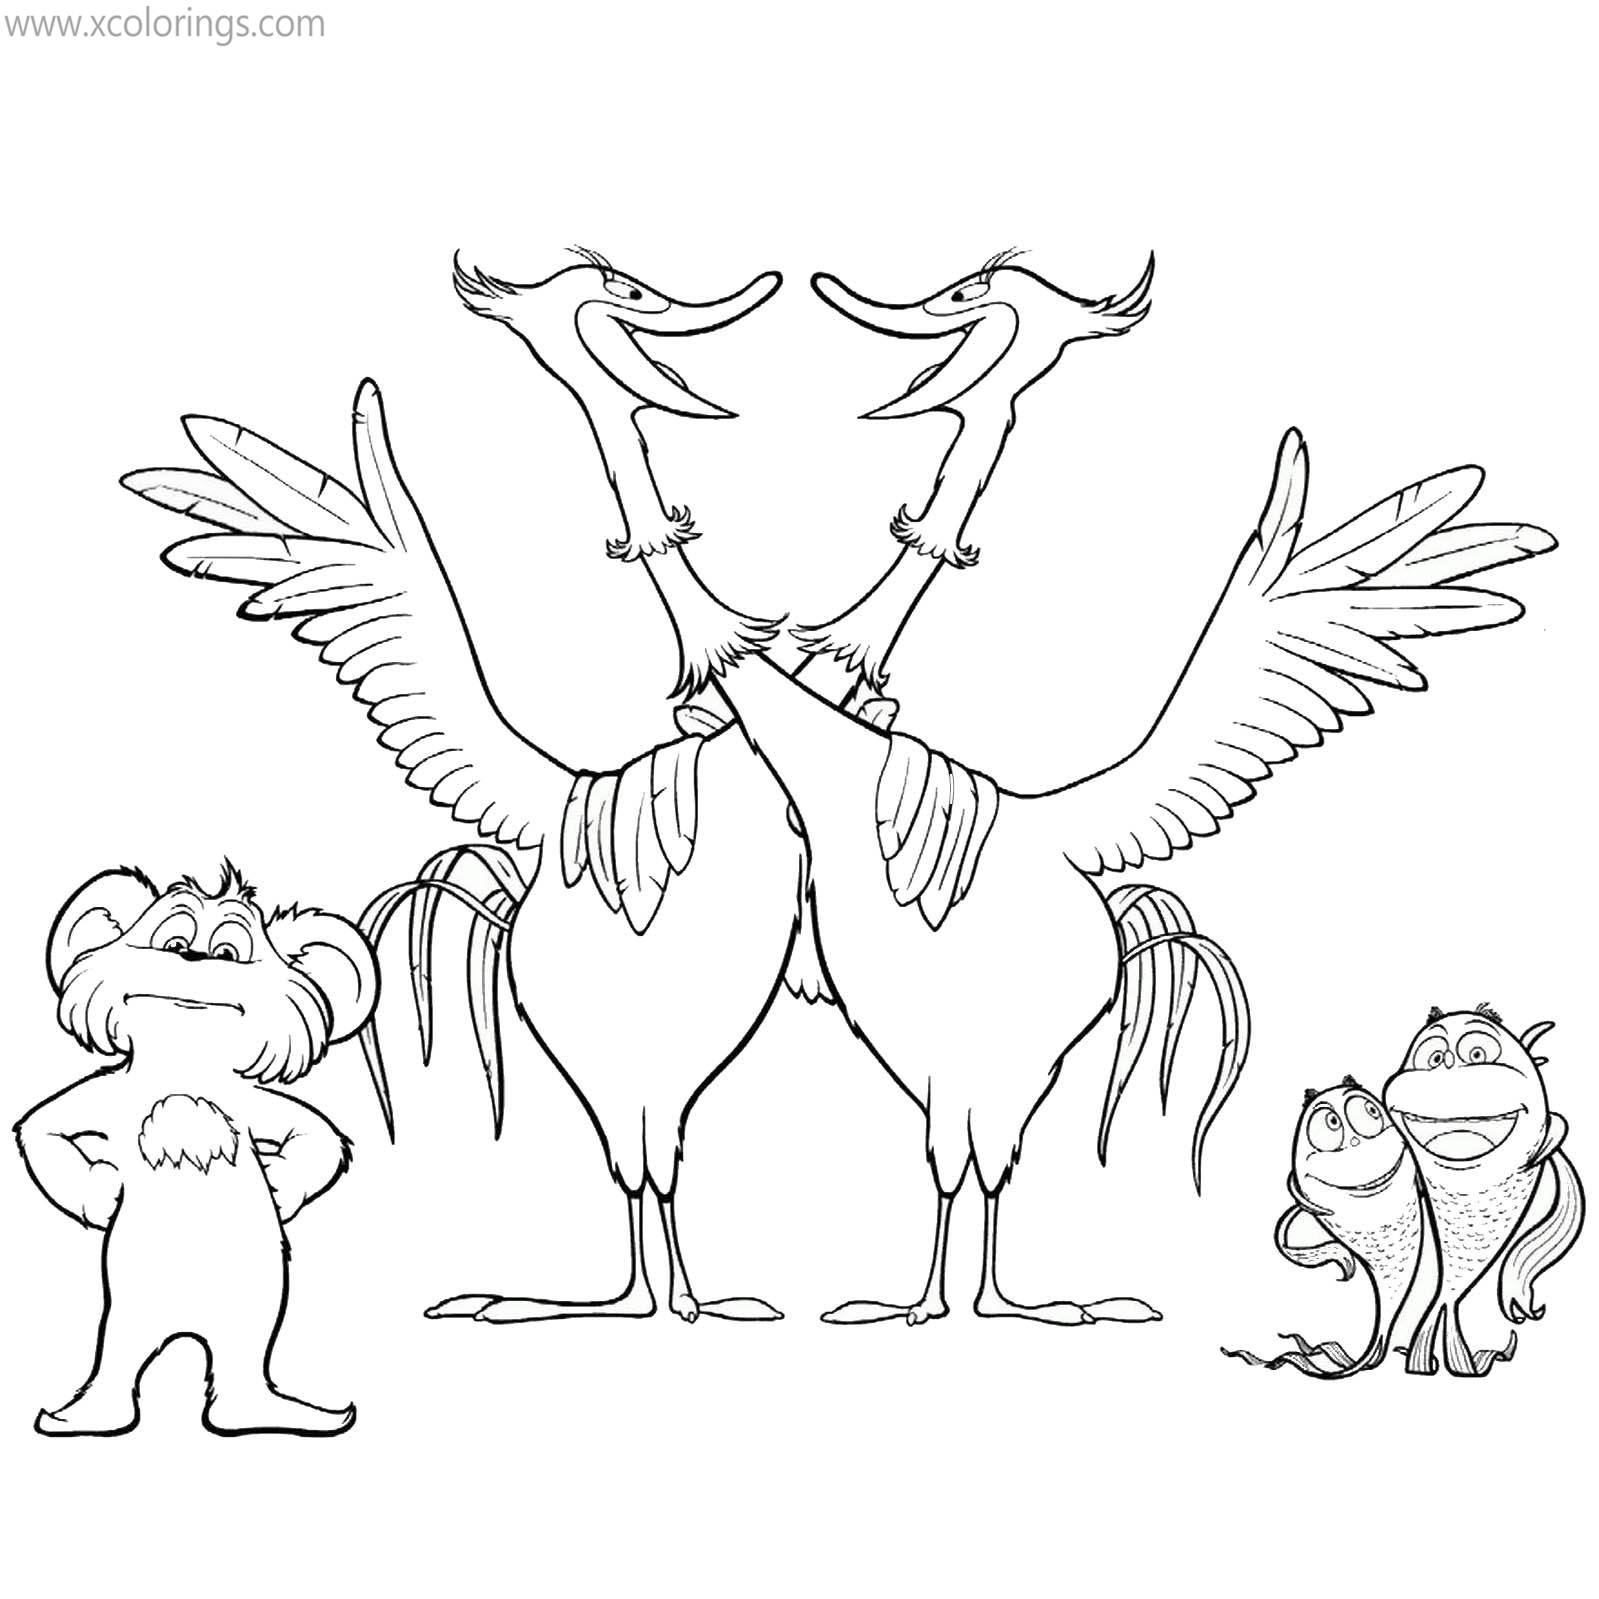 Free Lorax Coloring Pages Pipsqueak with Humming Fish and Swomee Swan printable